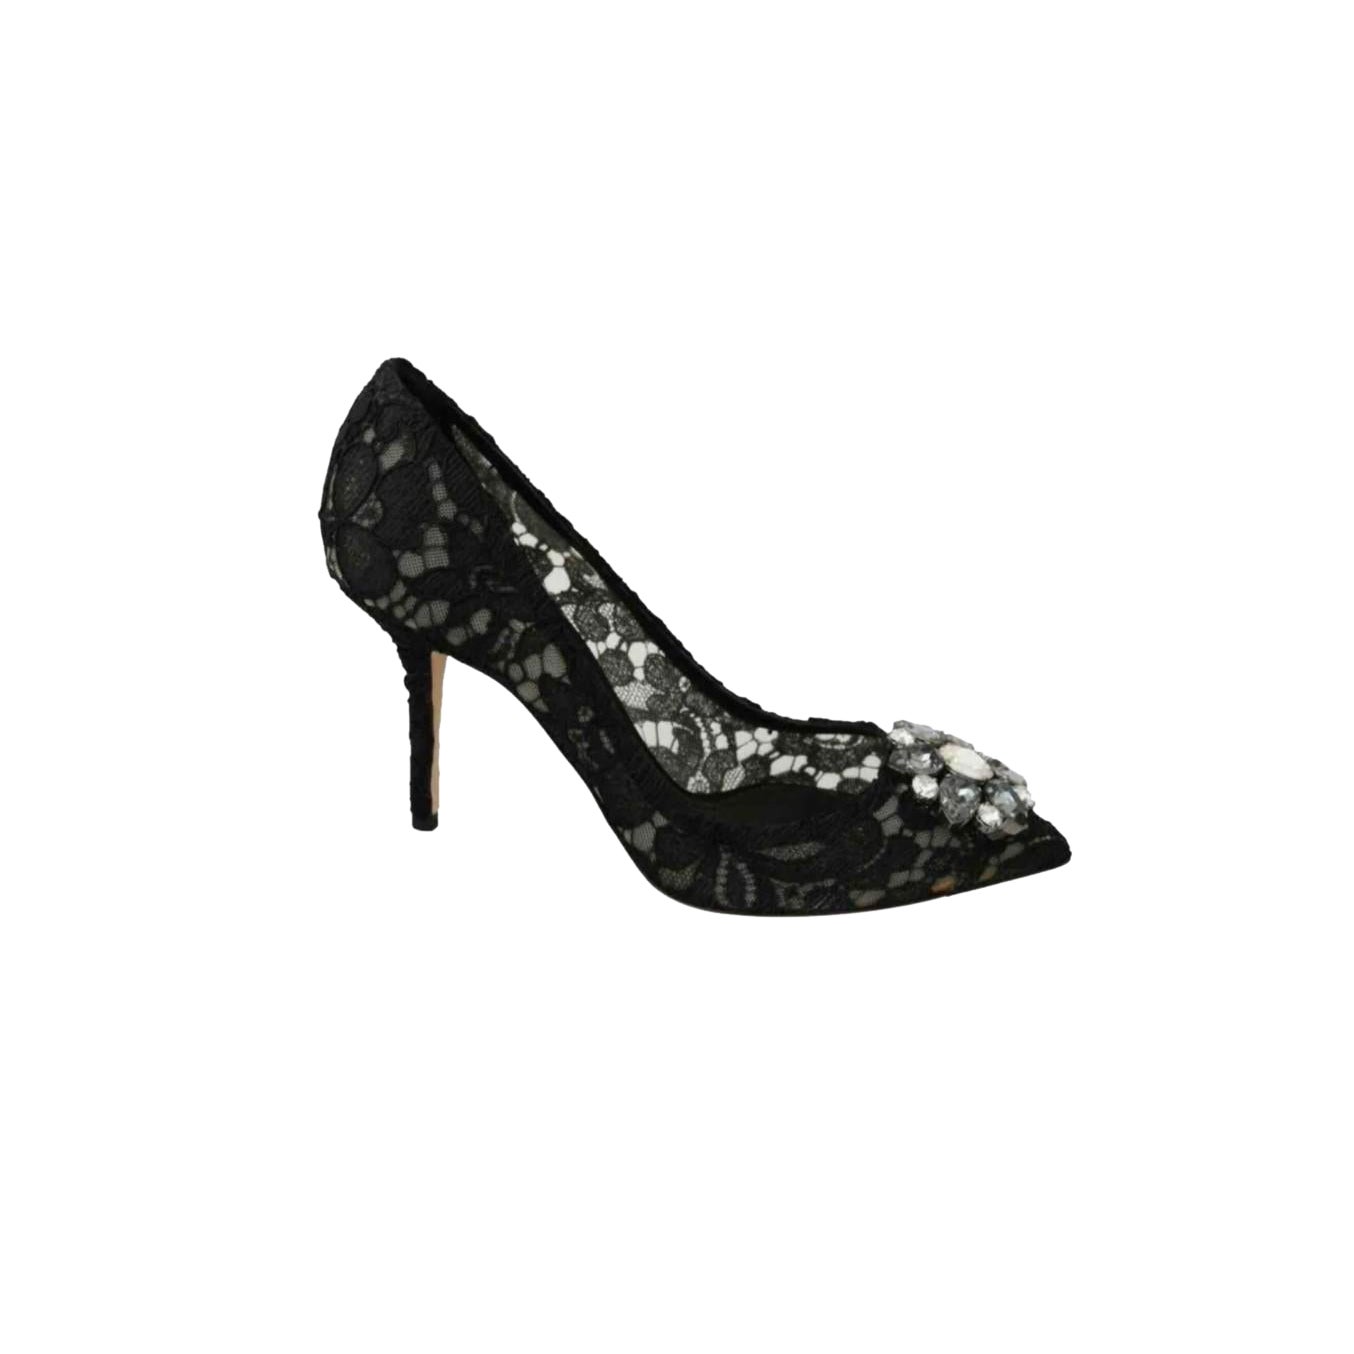 Dolce & Gabbana Black Lace Floral Pumps Heels Shoes Gray Crystals Leather